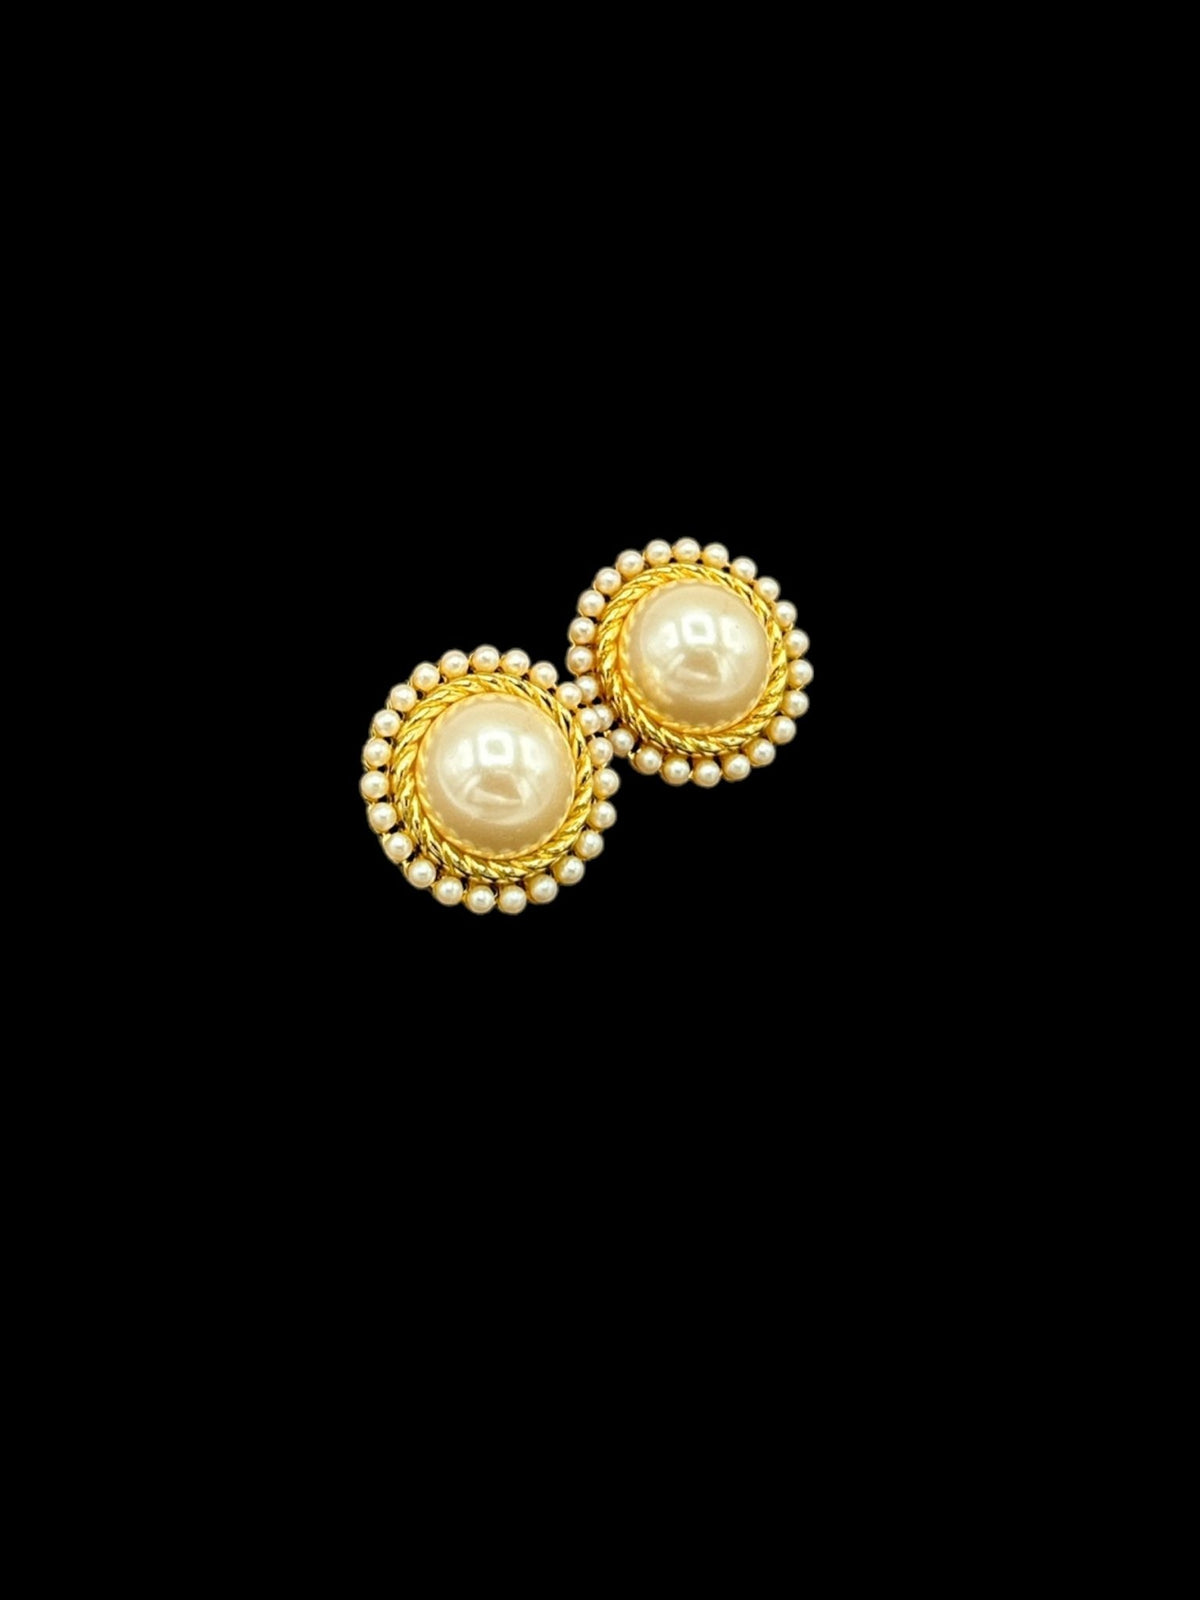 Richelieu Vintage Jewelry Round Pearl Cabochon Gold Clip-on Earrings - 24 Wishes Vintage Jewelry